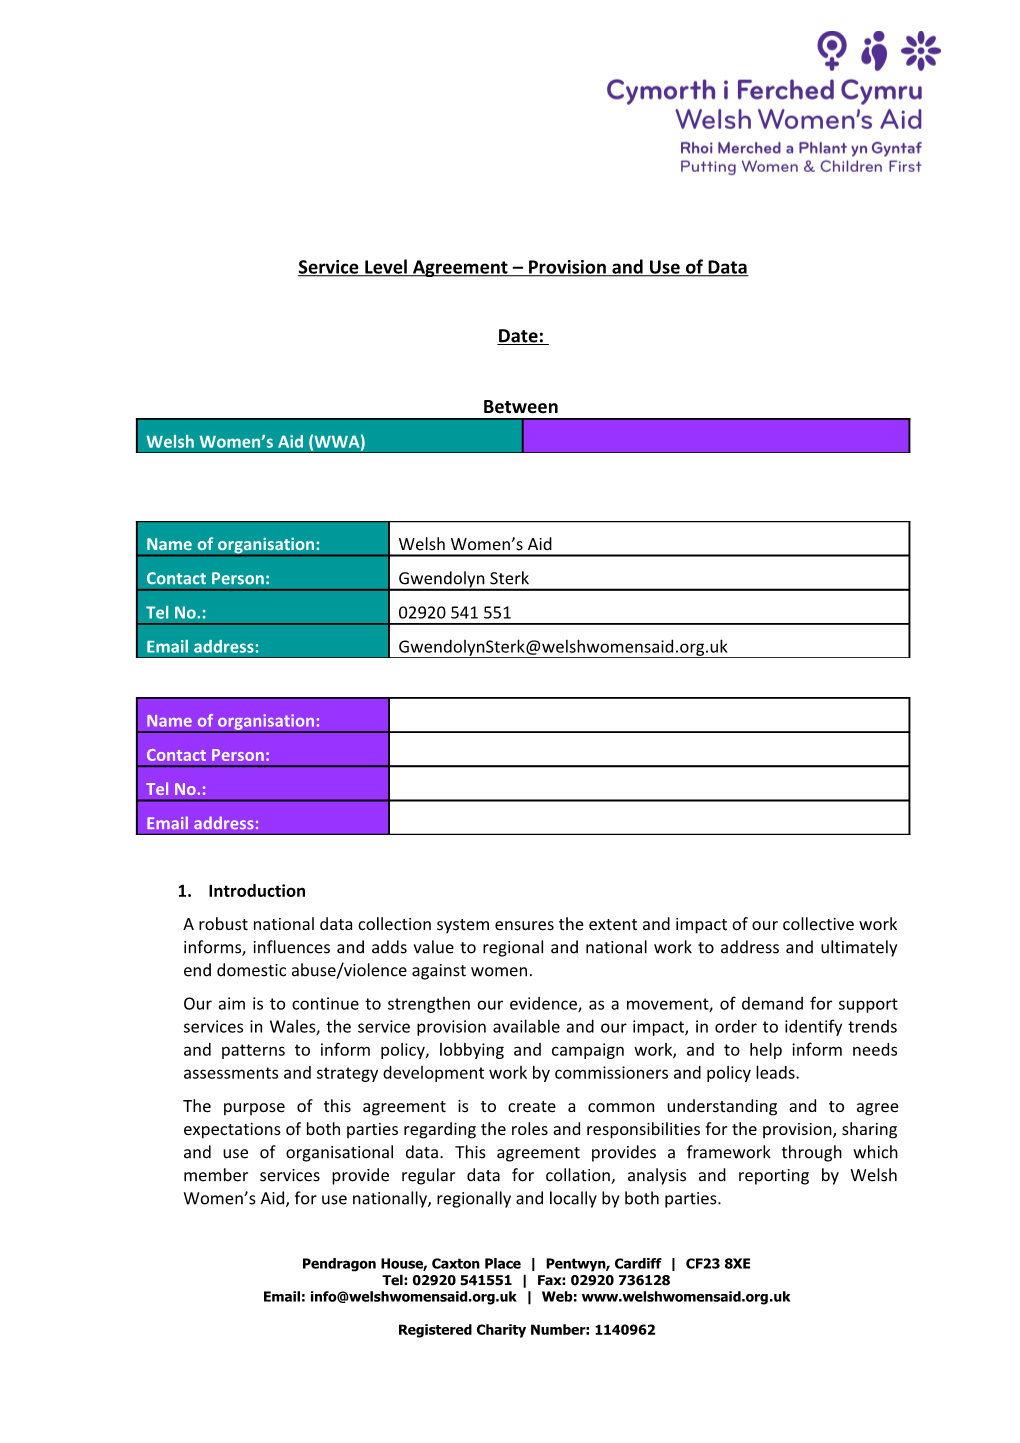 Service Level Agreement Provision and Use of Data